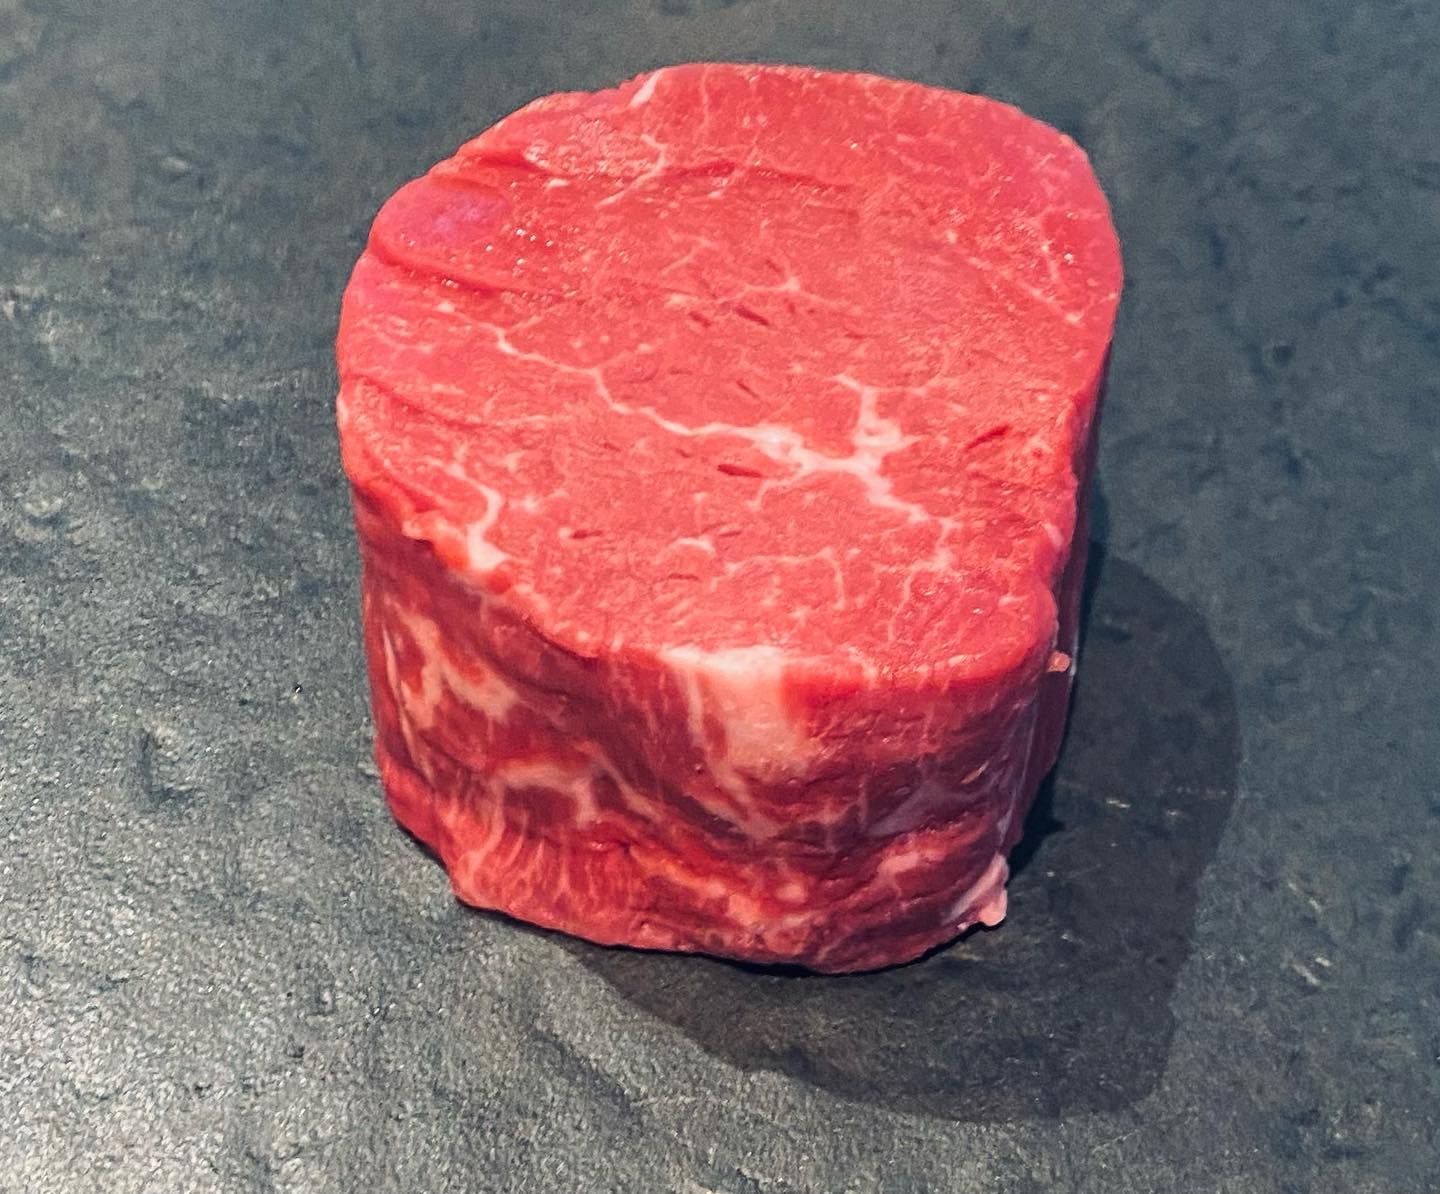 Unfortunately, due to unstable supply of Wagyu beef and
soaring prices, we have to change our menu .
Black Angus beef will be used for carpaccio and steak, but we will be continuing Wagyu pancake and Wagyu curry .

Not to worry, with chef Yusuke’s skills the Angus Beef is still delicious!